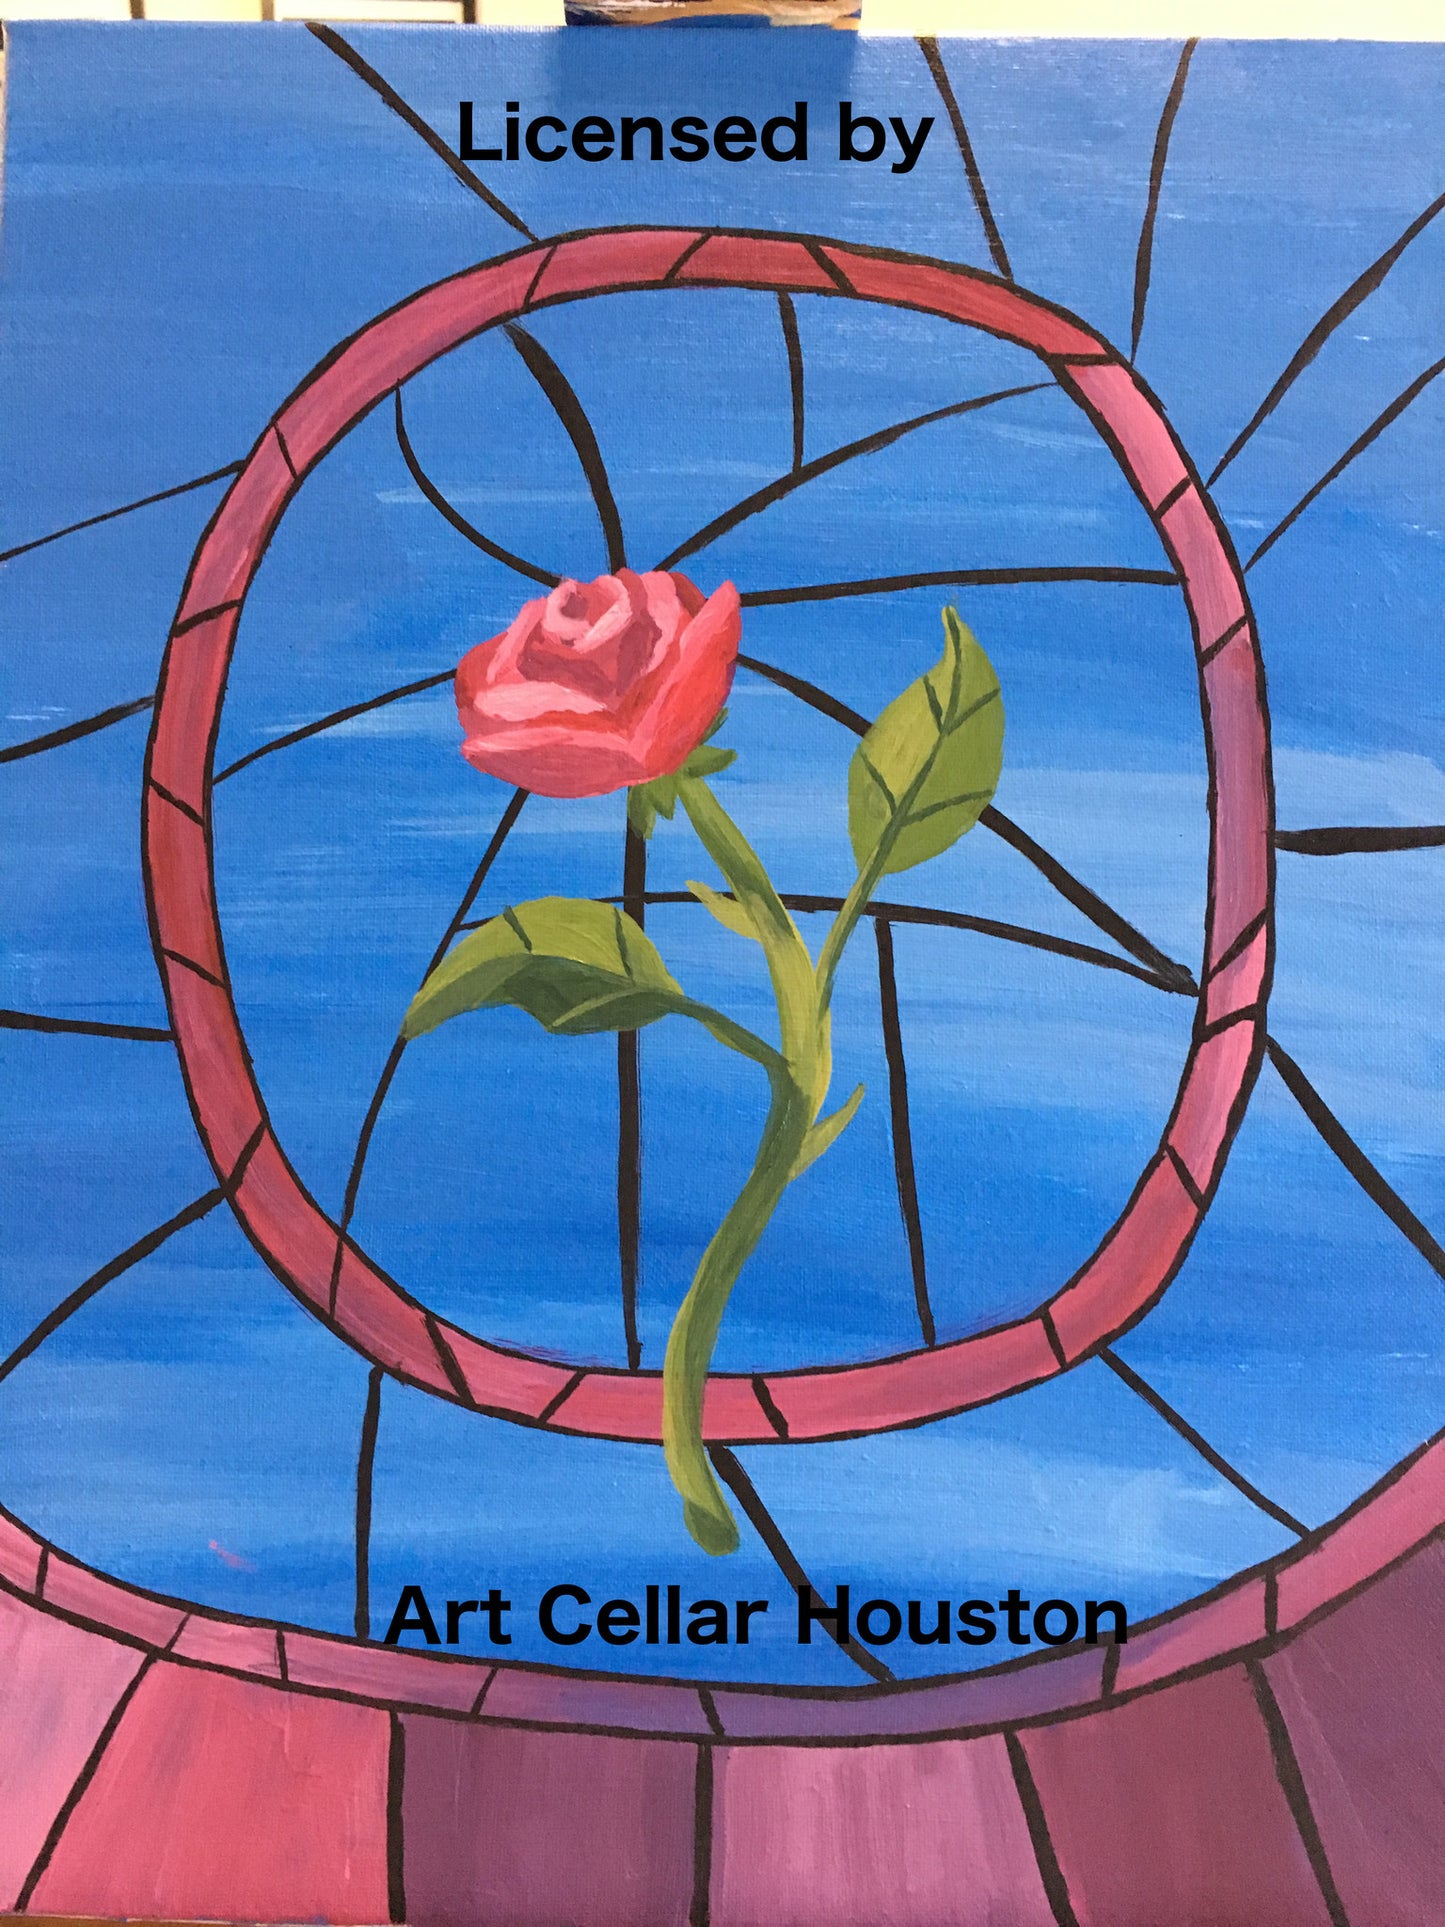 Sat, Feb 5th, 9-11A “Stained Rose” Houston Public Family Painting Class